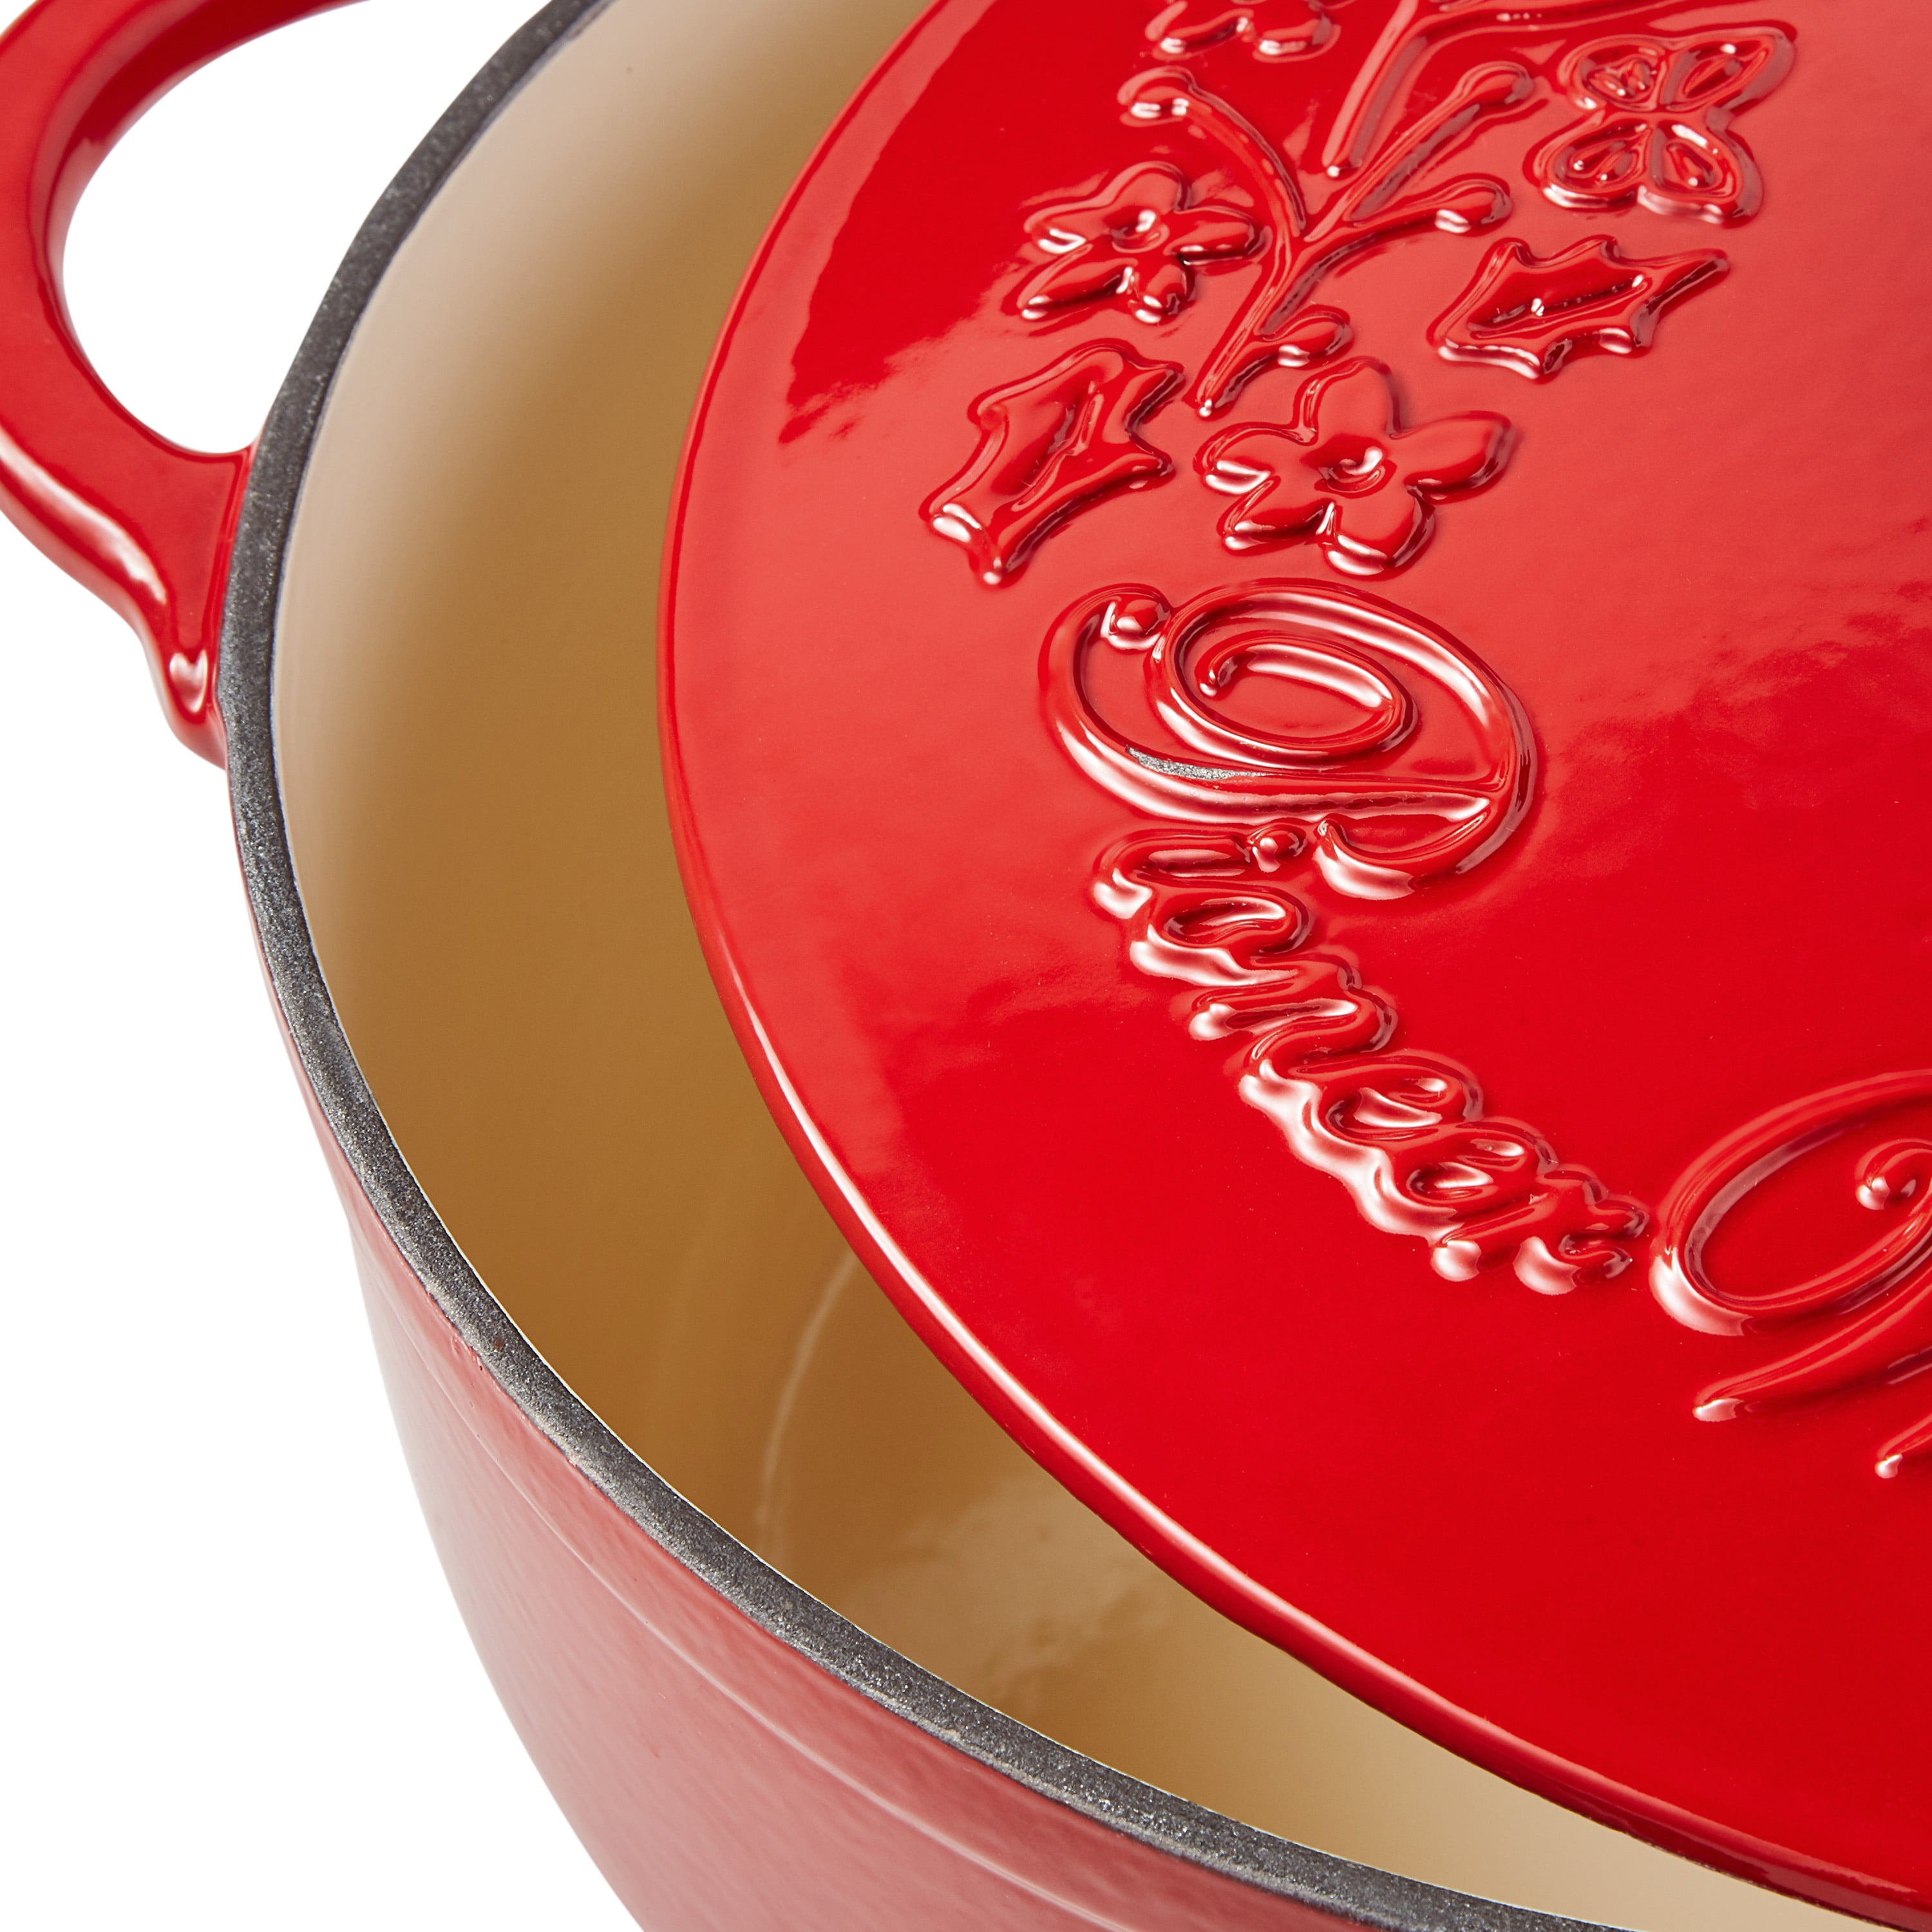 The Pioneer Woman Timeless Beauty Enamel Cast Iron 5-Quart Dutch Oven, Red